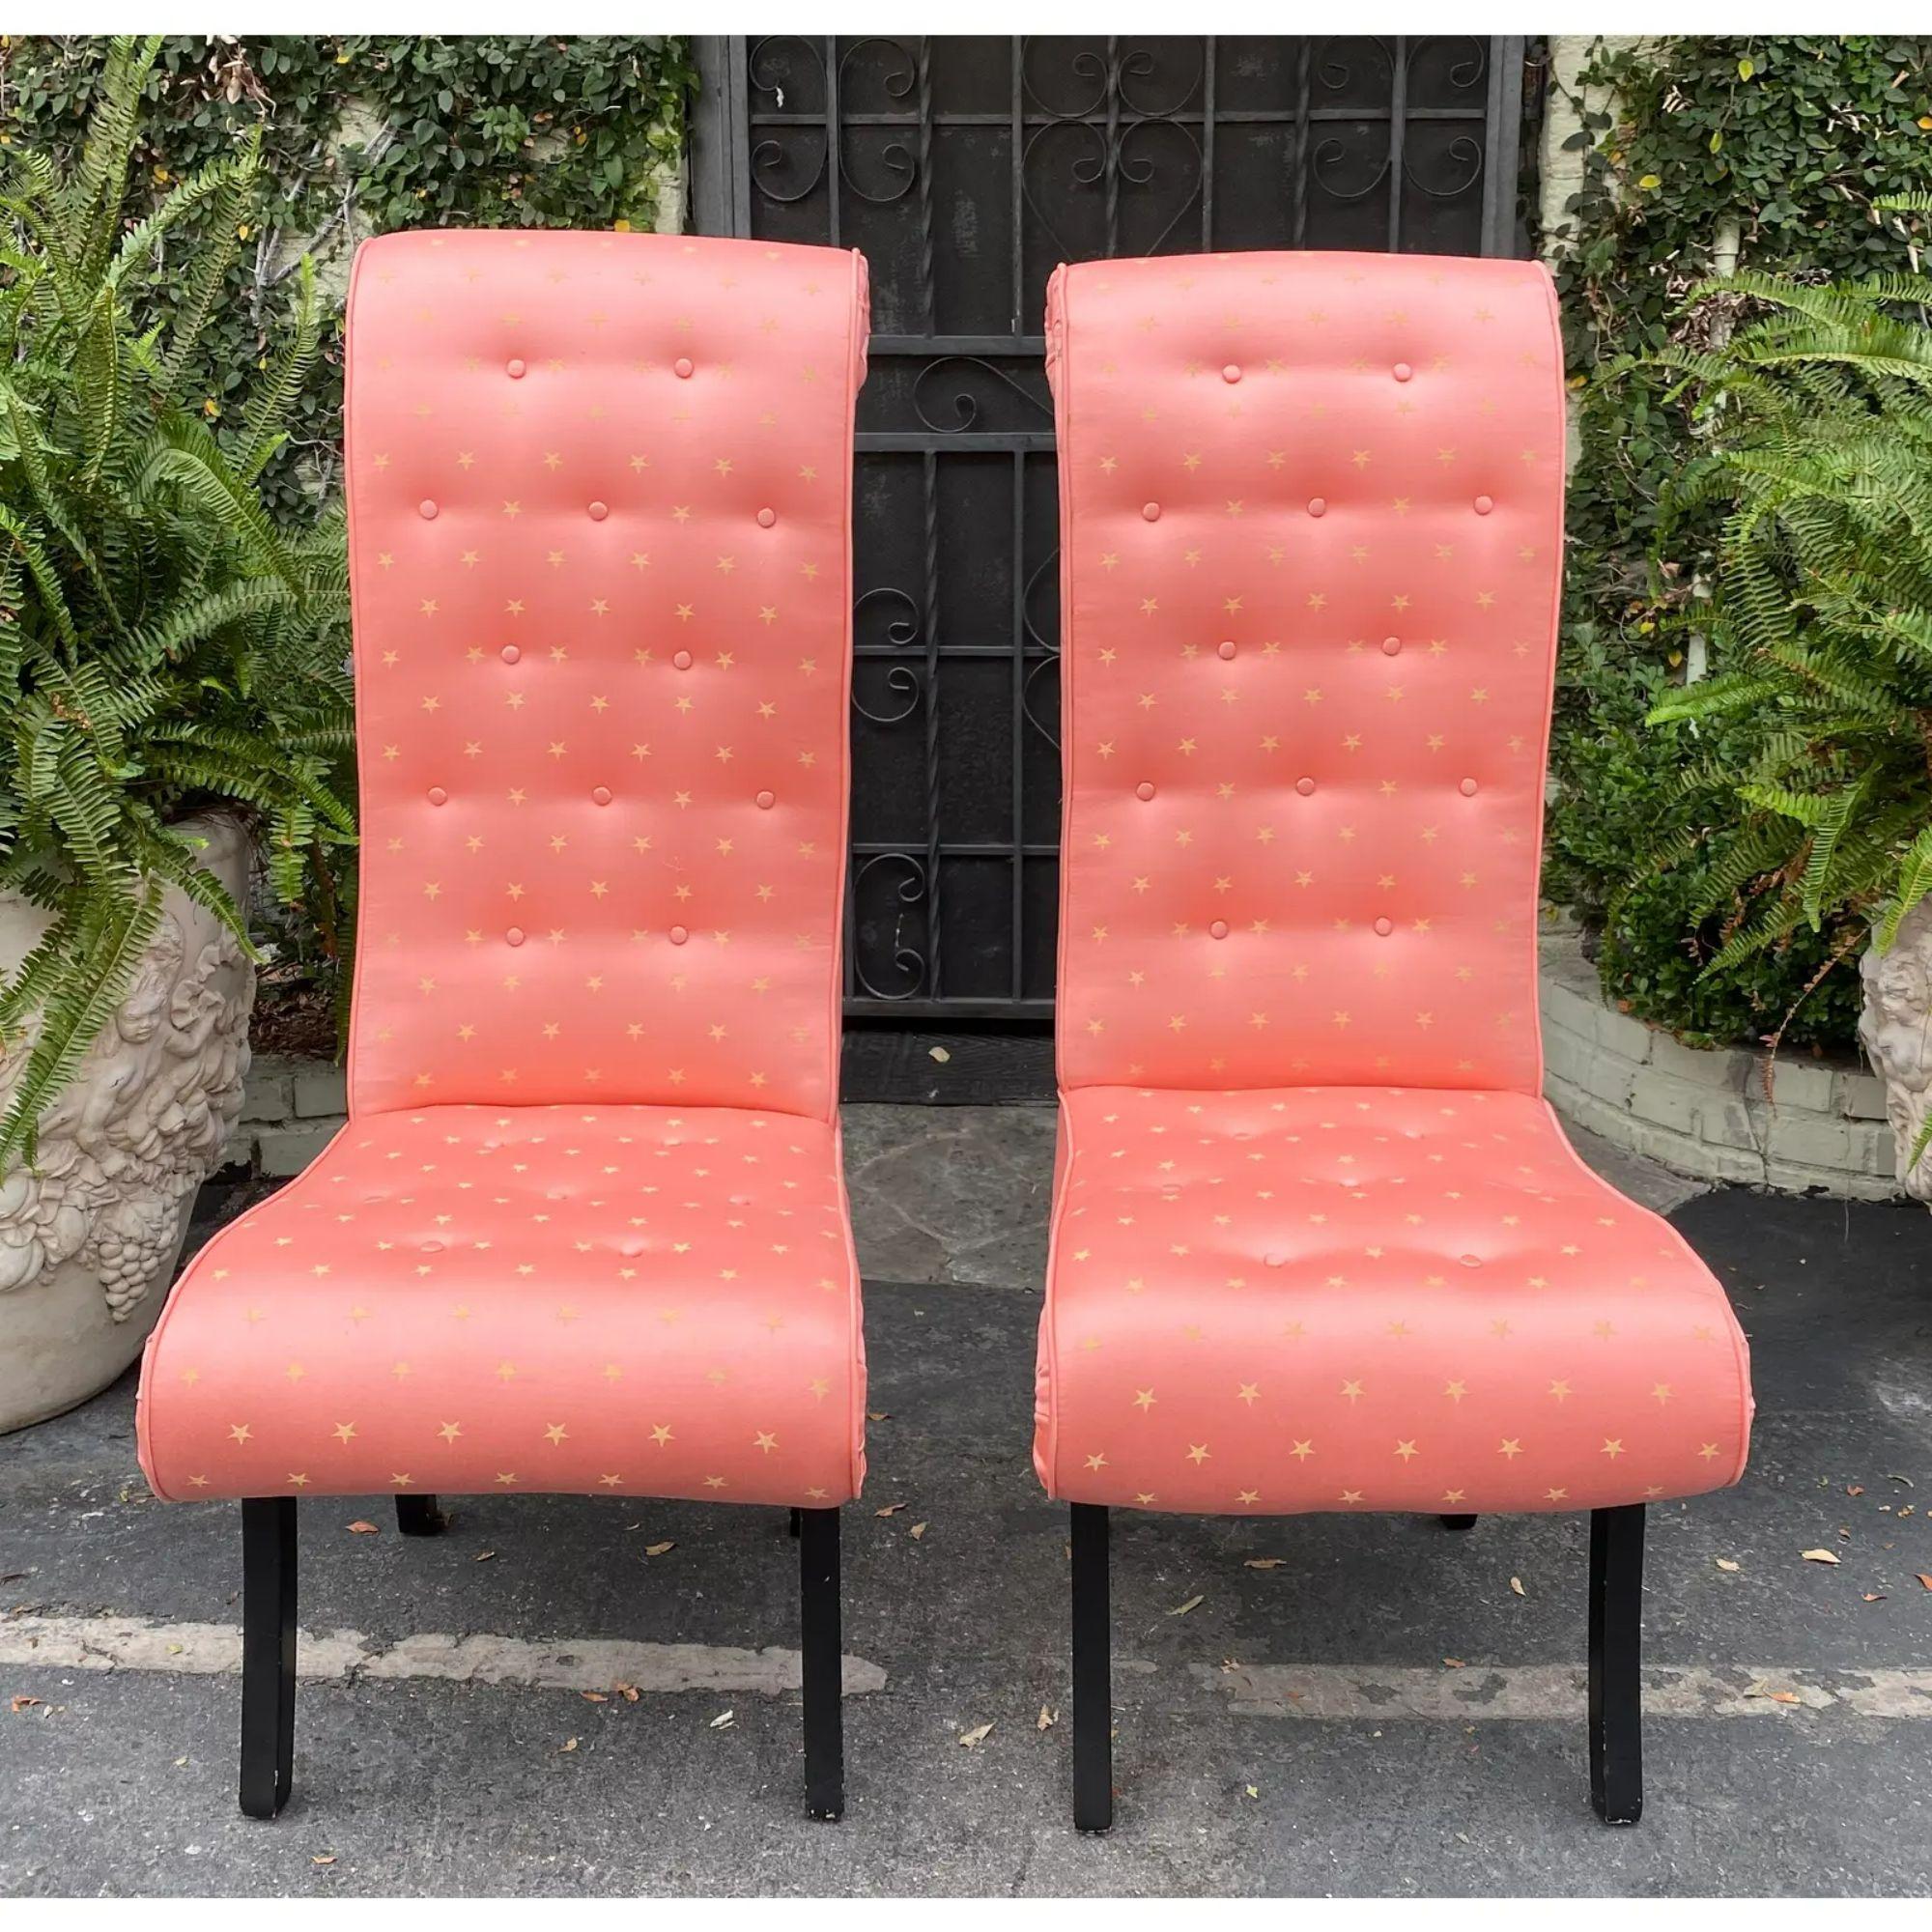 Mid-century Hollywood Regency scroll back chairs with scalamandre fabric - a pair.

Additional information:
Materials: fabric, silk, wood.
Color: pink.
Designer: The House of Scalamandre.
Period: 1950s.
Styles: Hollywood Regency.
Number of